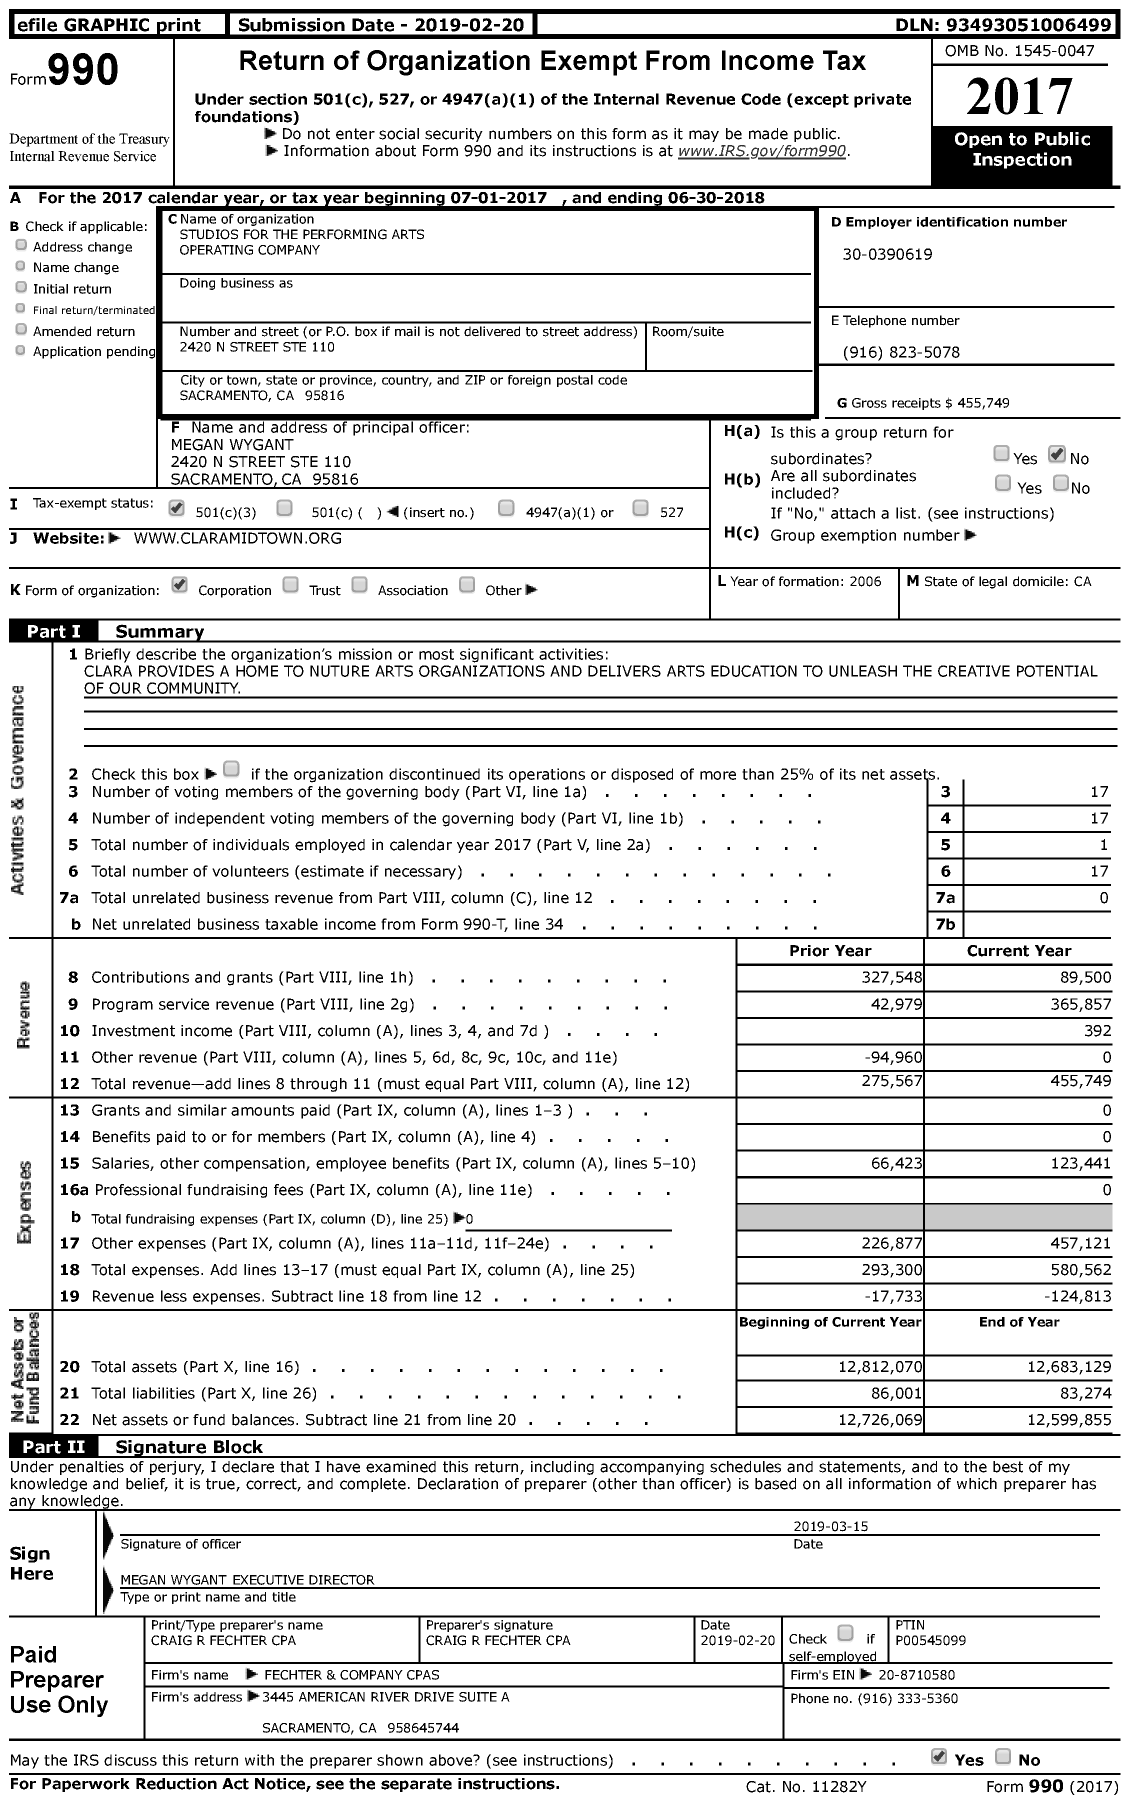 Image of first page of 2017 Form 990 for Studios for the Performing Arts Operating Company